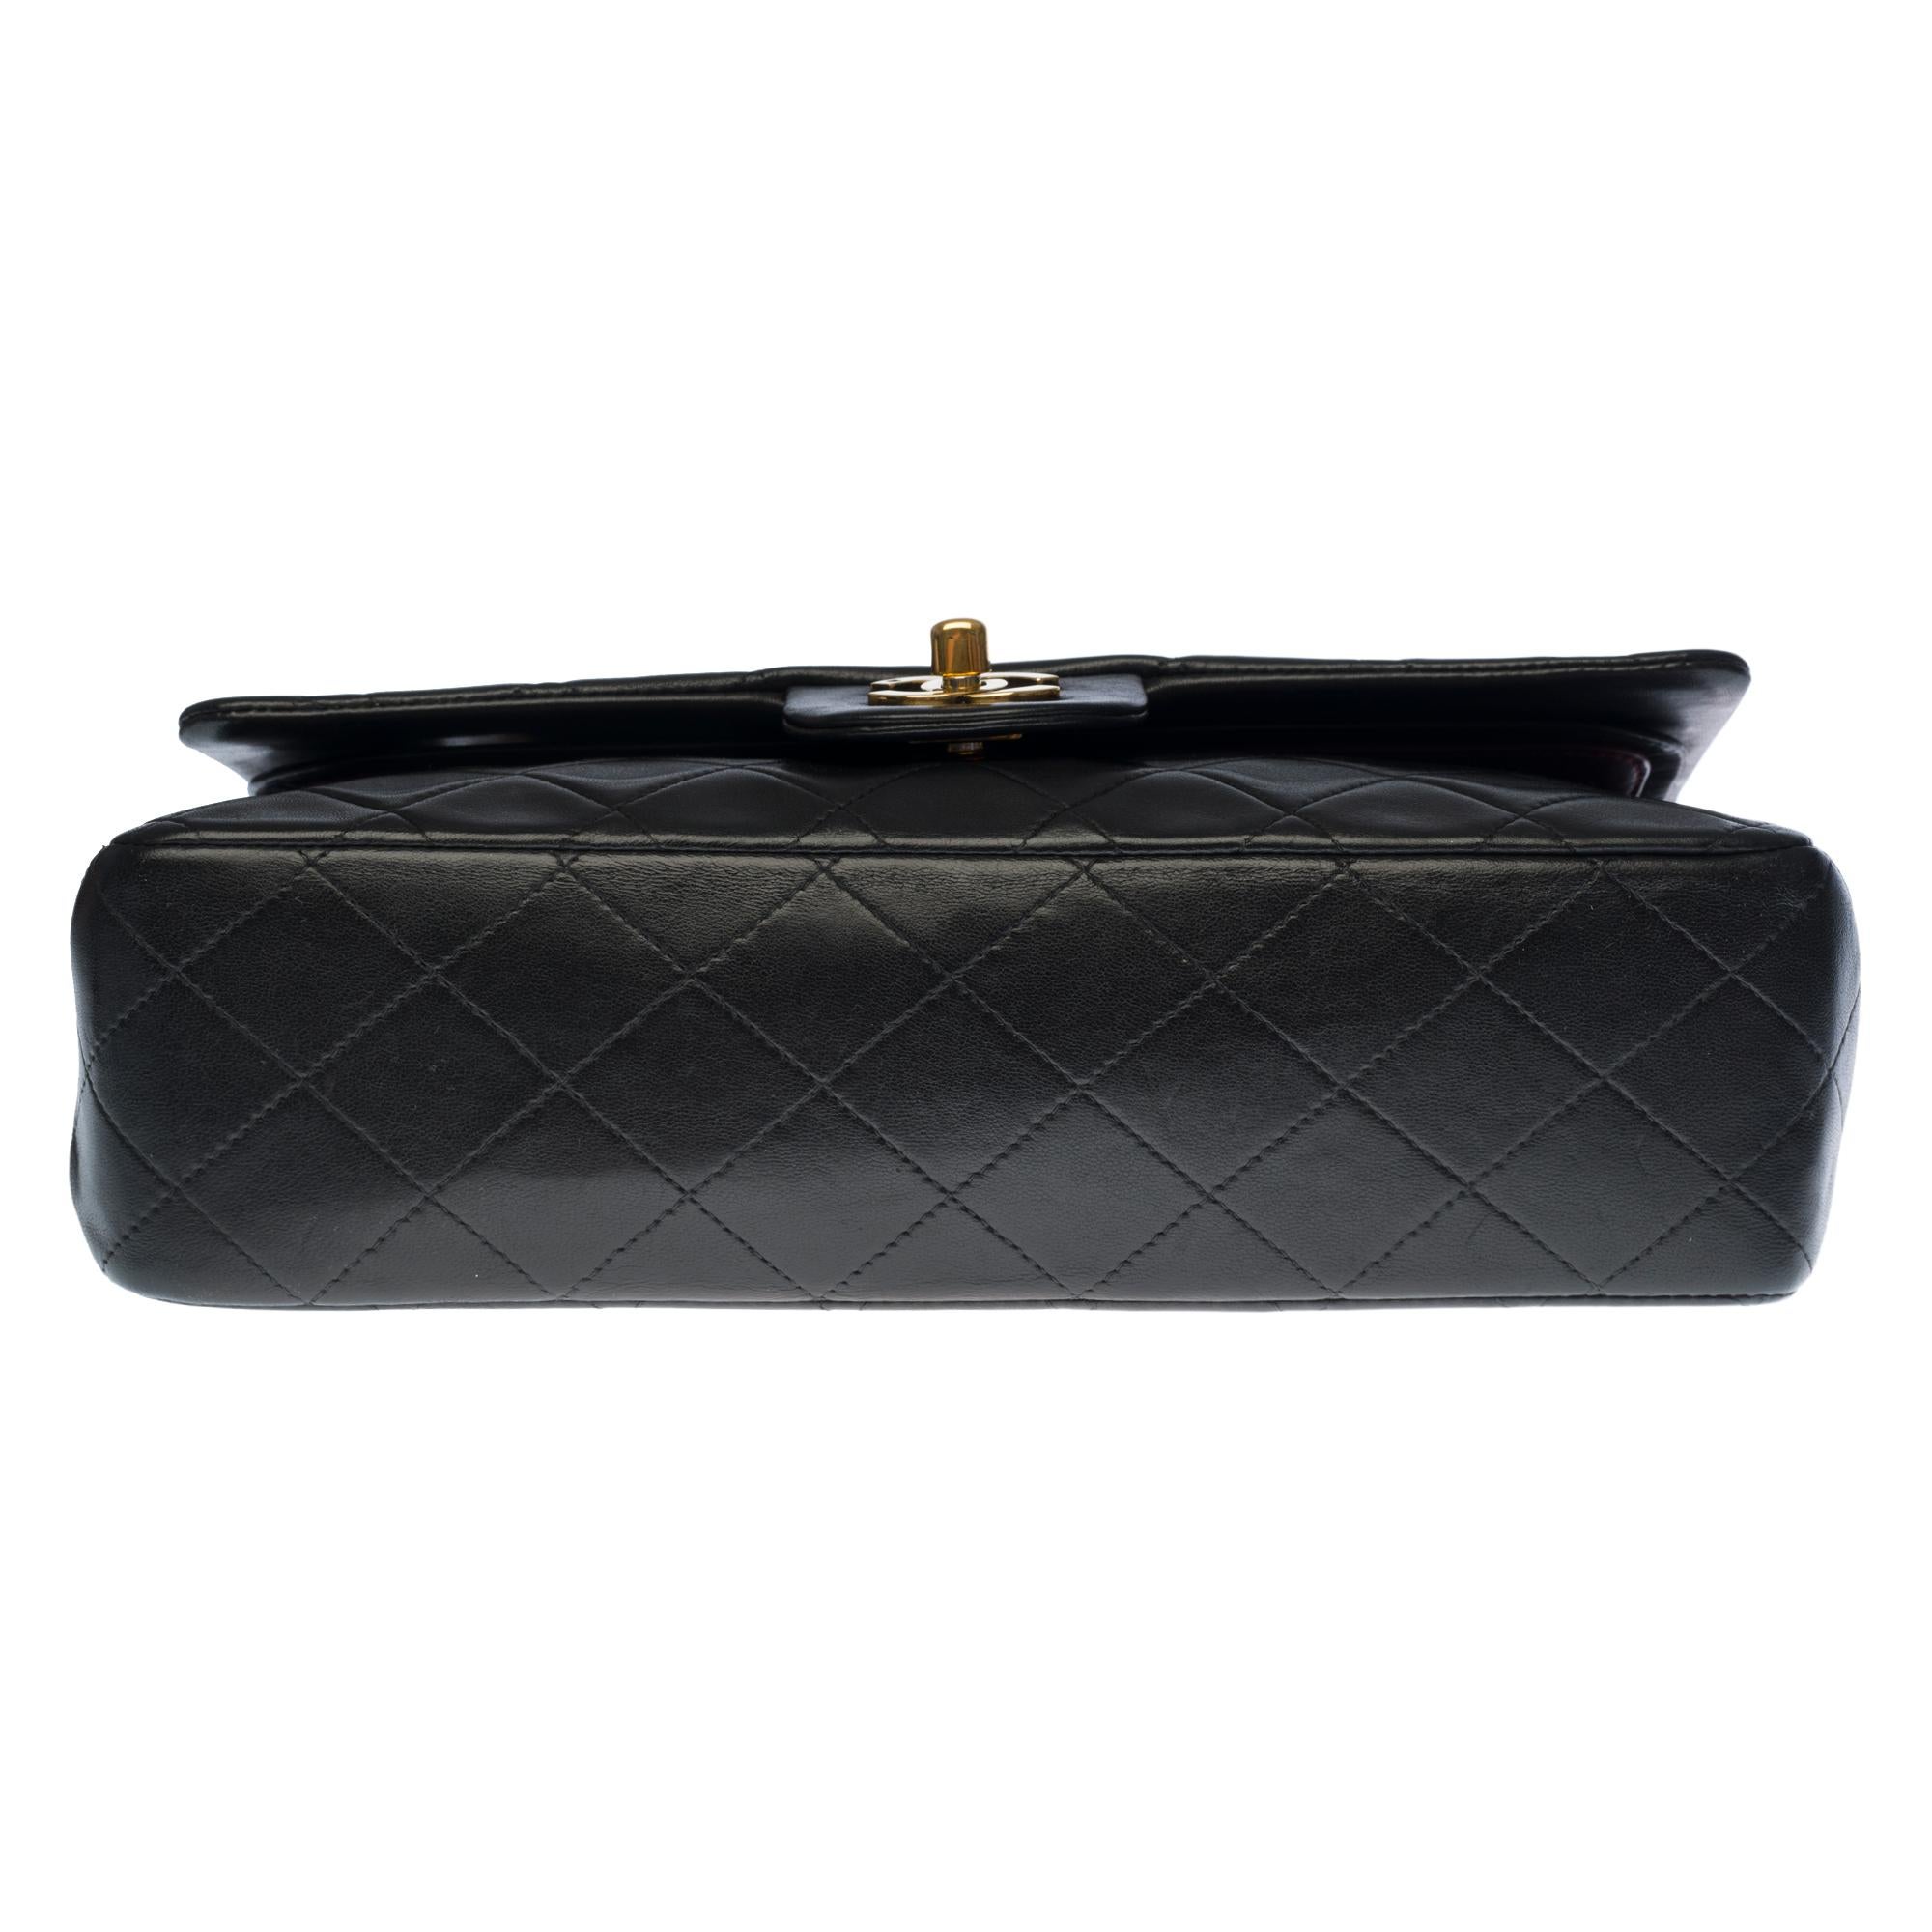 Chanel Timeless Medium double flap shoulder bag in black quilted lambskin, GHW 4